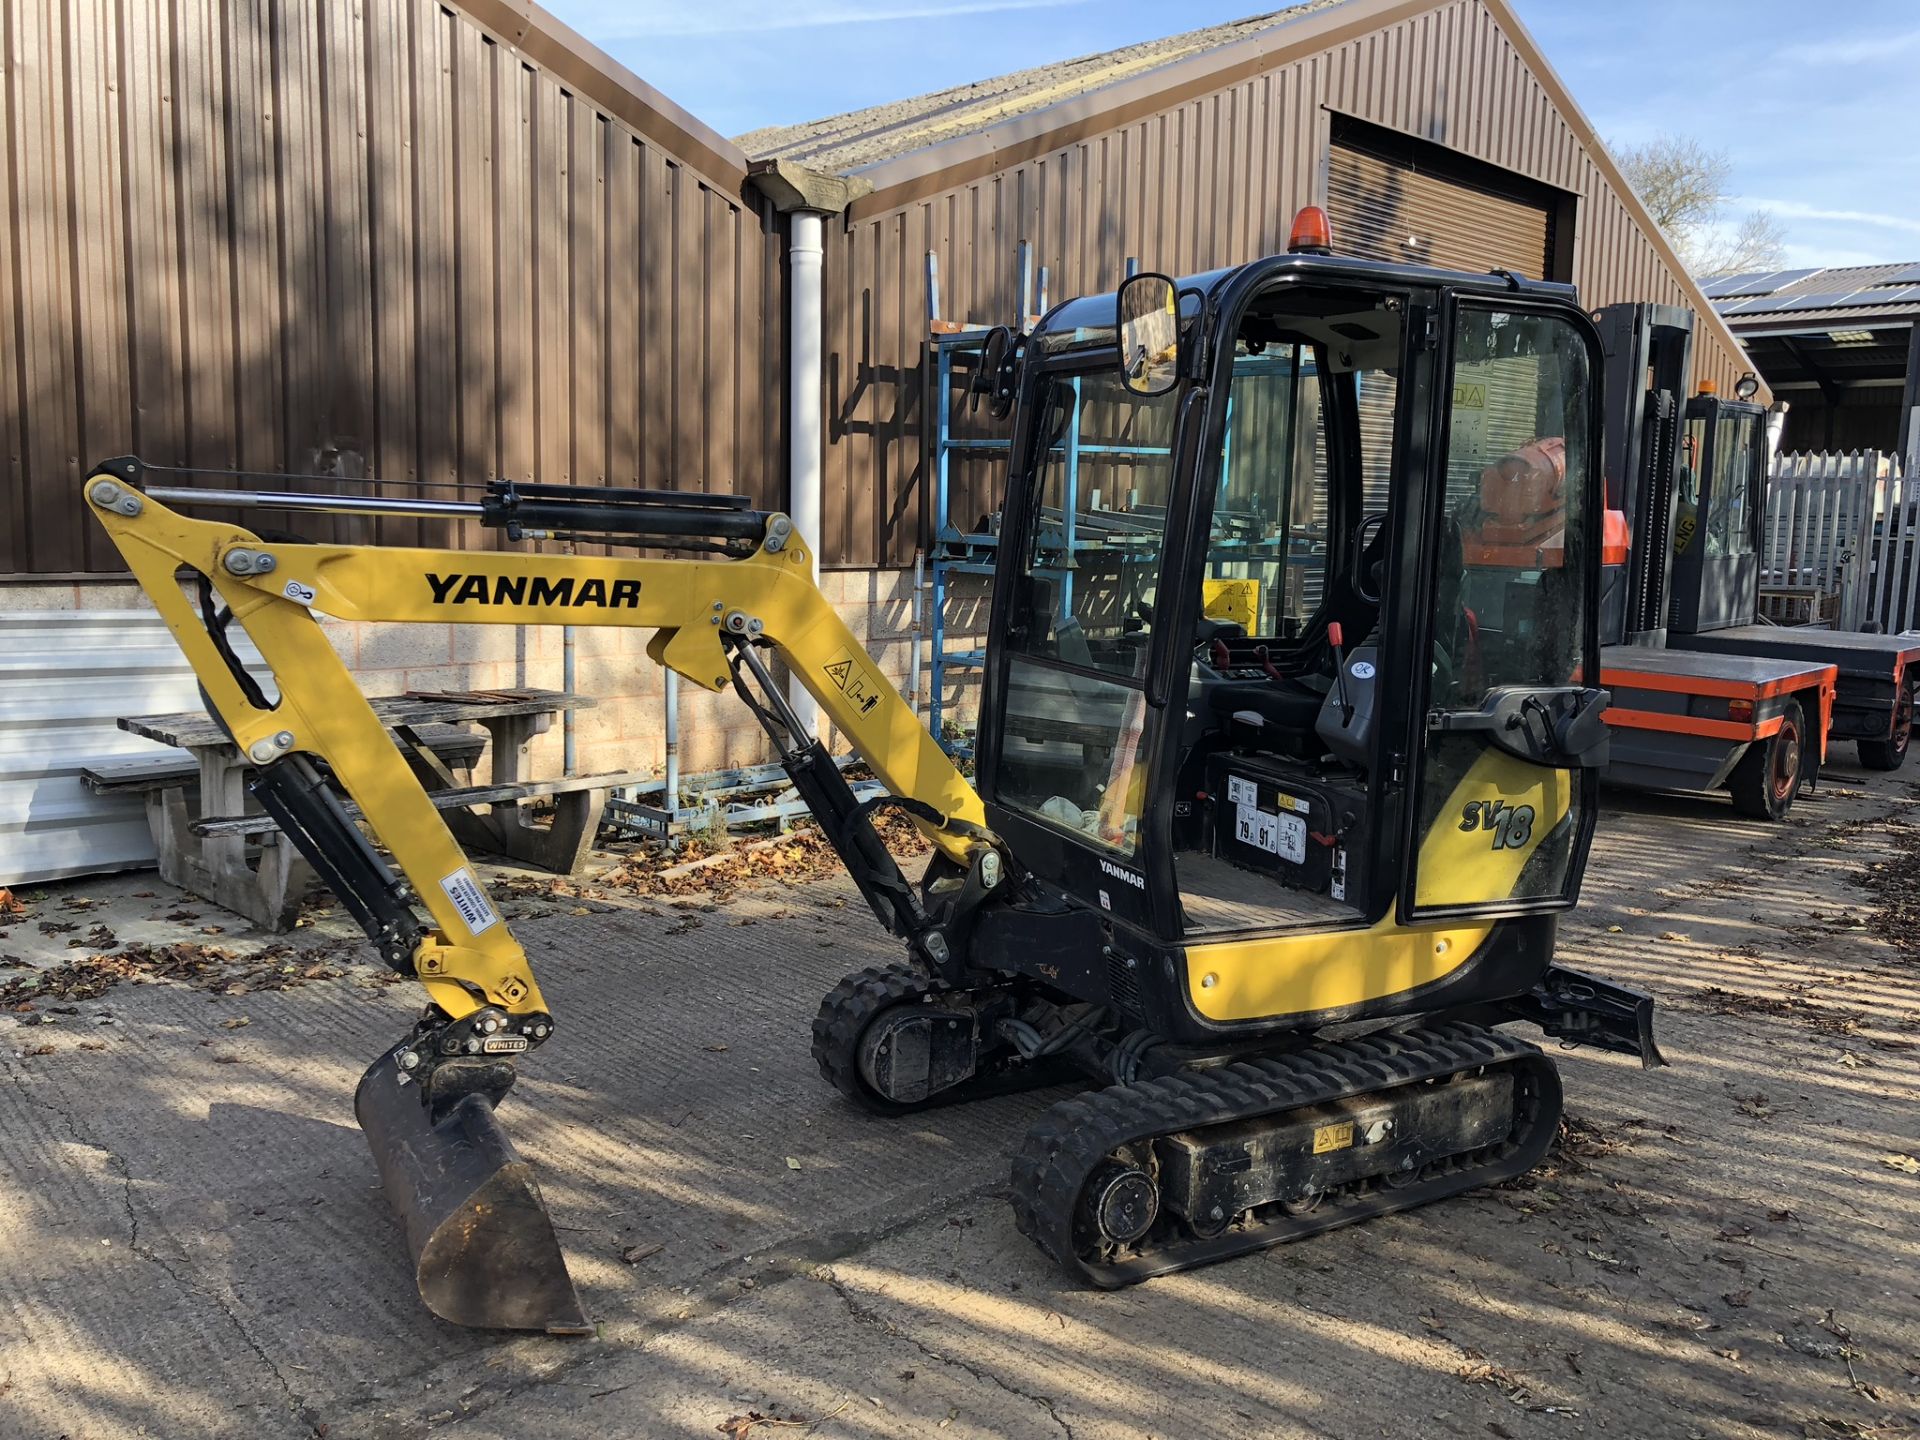 Yanmar SV18 CR Mini Excavator, Rubber Tracks, Serial No. G6127 (2017/10), with Quick Hitch - Image 23 of 33